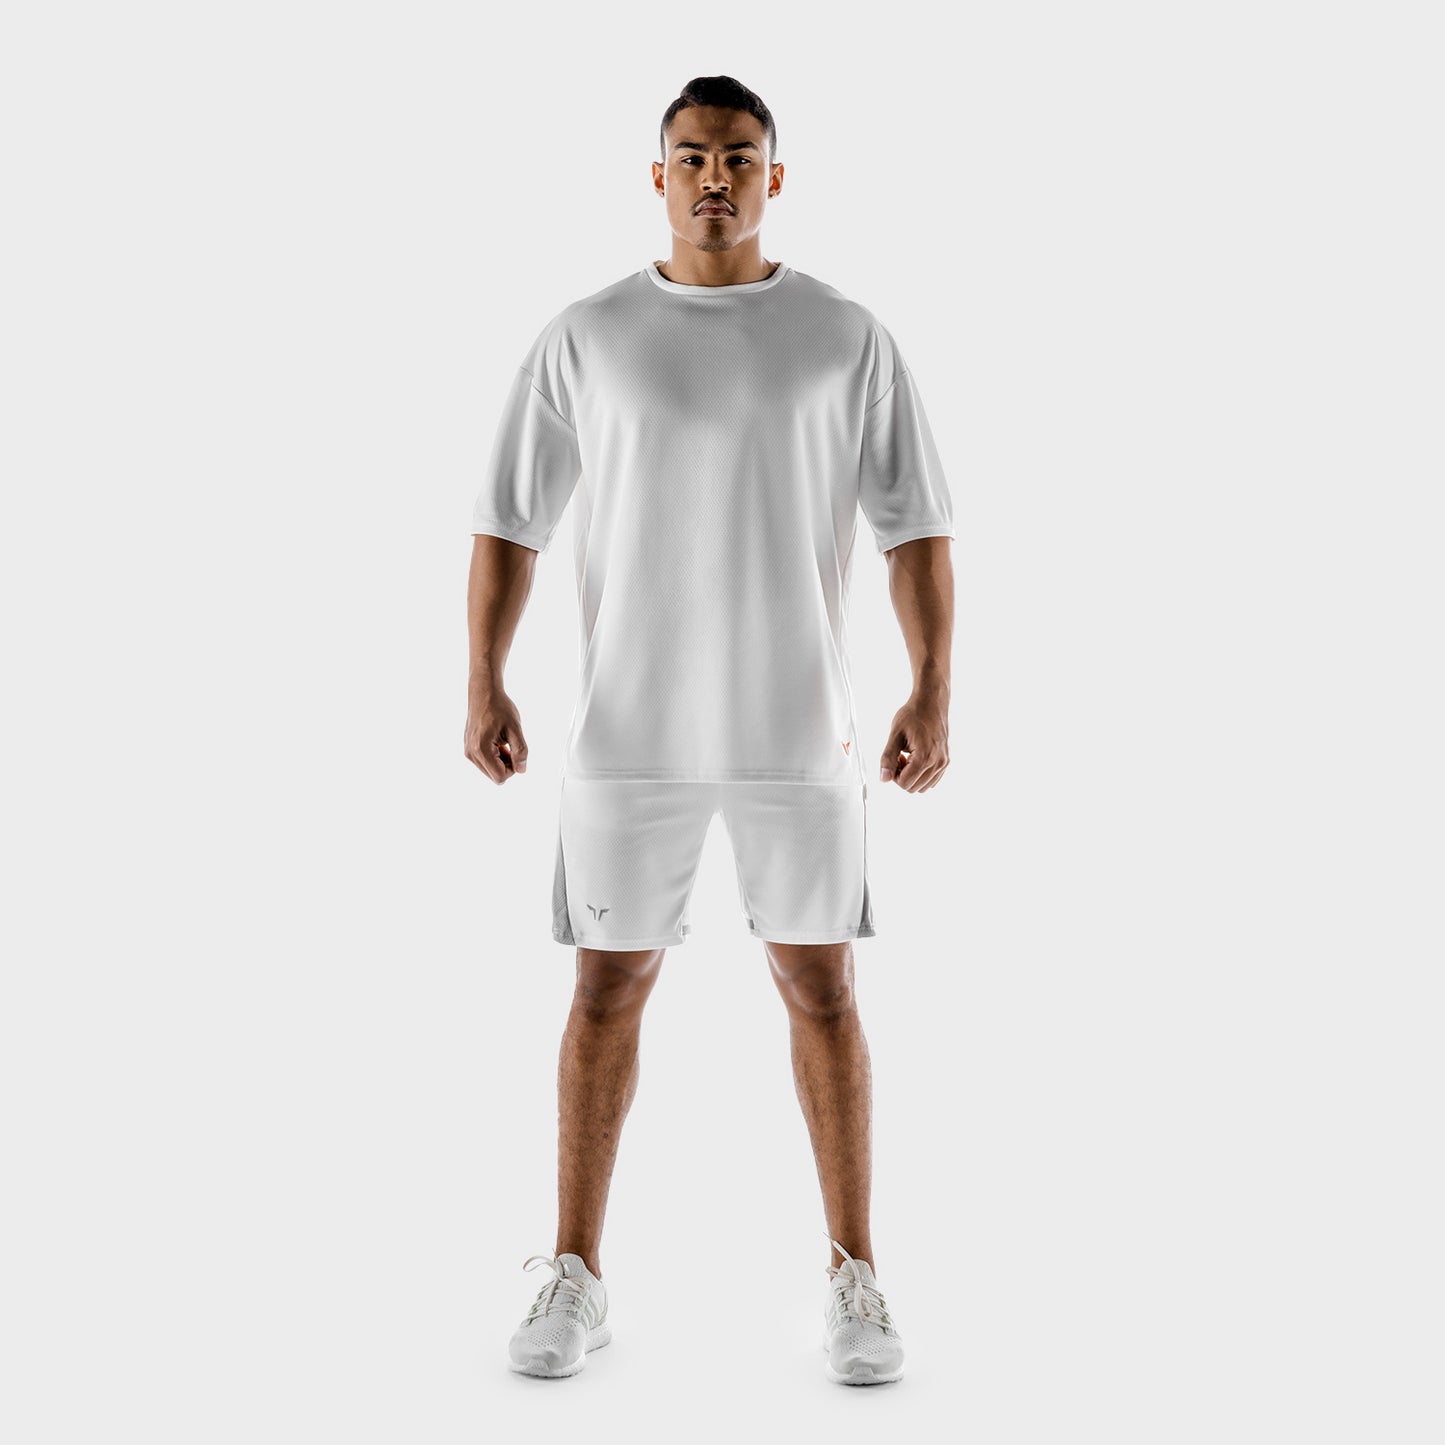 squatwolf-gym-wear-hybrid-2-0-oversize-tee-white-workout-shirts-for-men